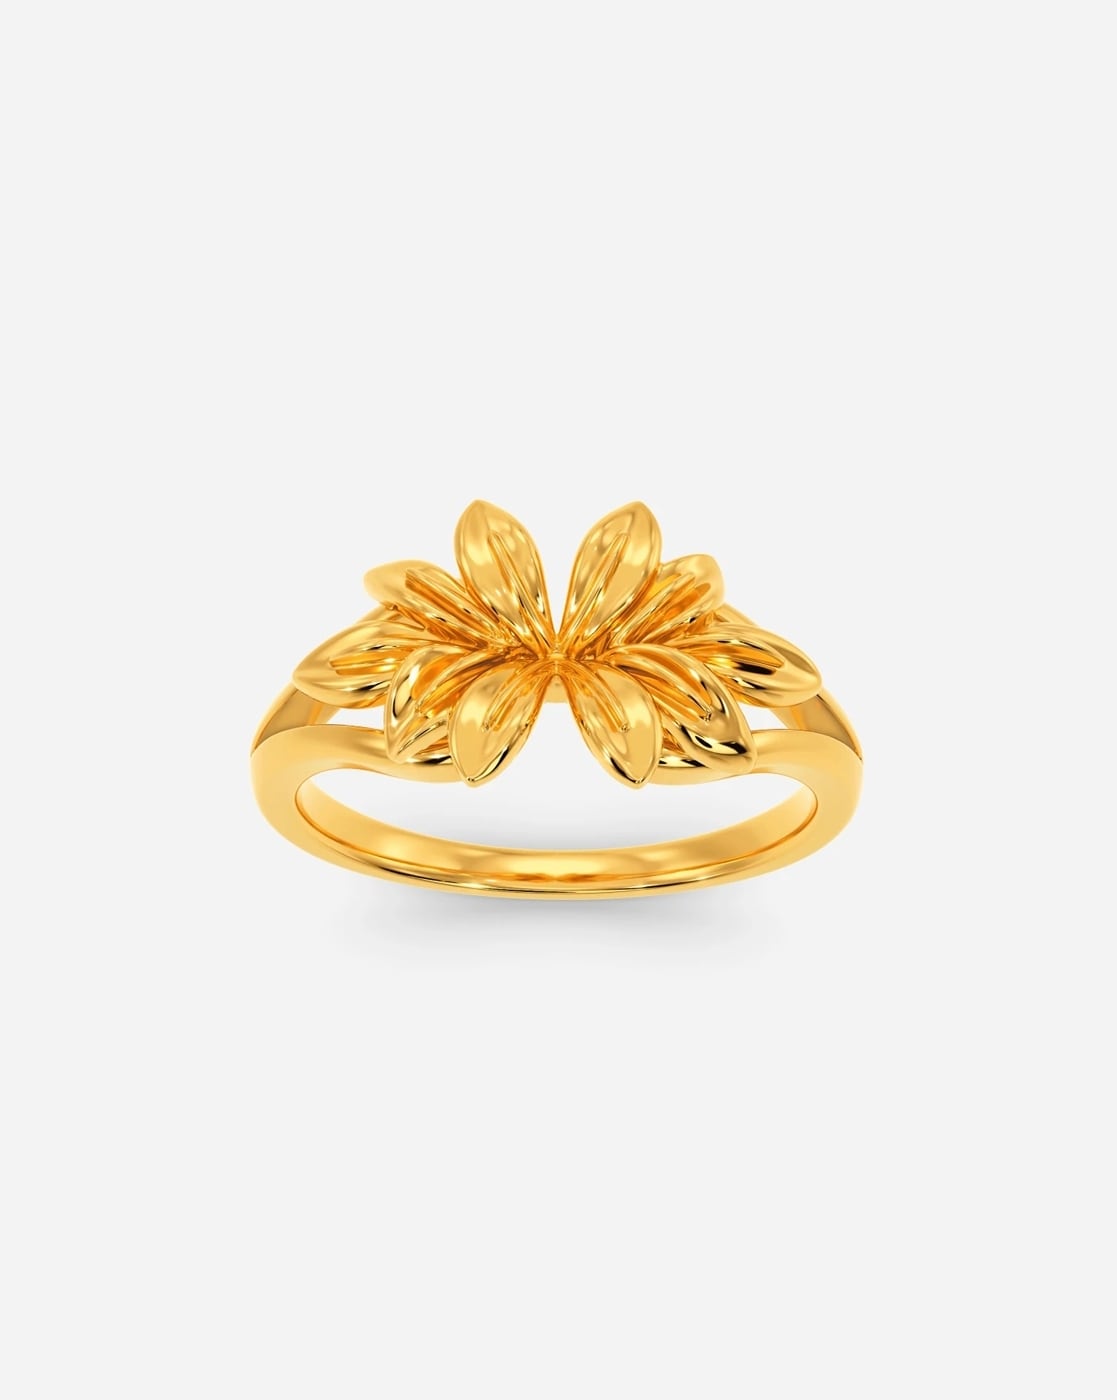 Gold Ring Designs without Stones for Female | Latest Designs of Gold Rings  collection for Women - YouTube